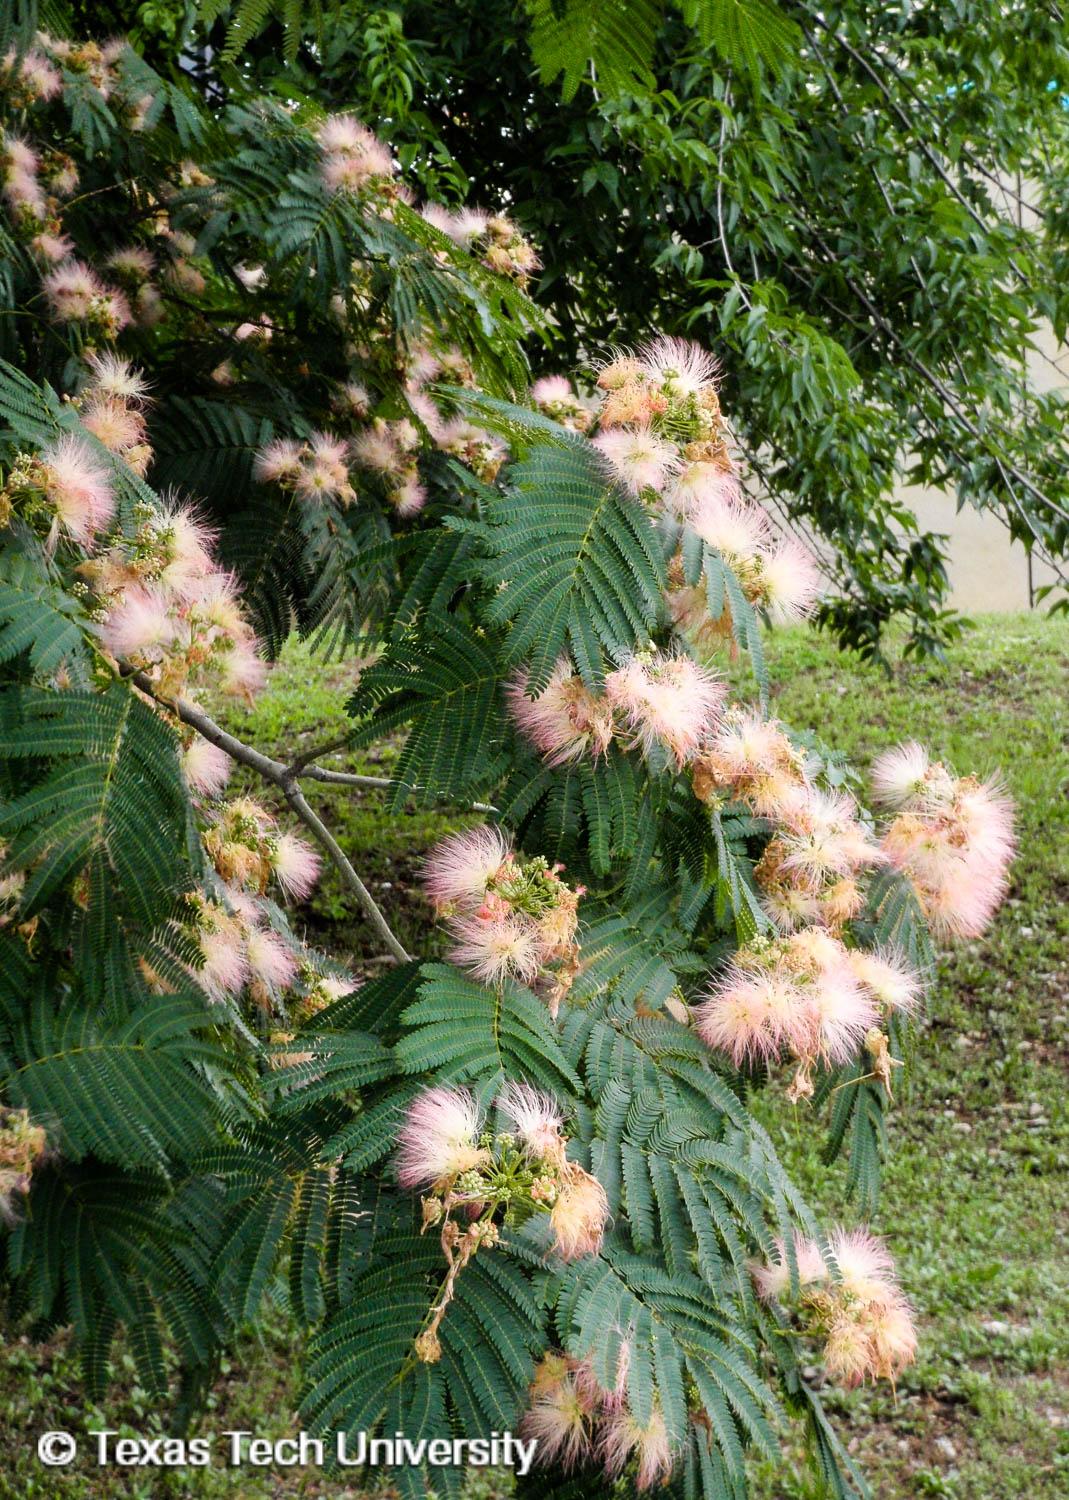 Herb Pharm - Ever notice these pink puff balls drifting on the breeze?  These floating blossoms belong to none other than the Albizia tree (Albizia  julibrissin)! Otherwise known as Mimosa or Silk